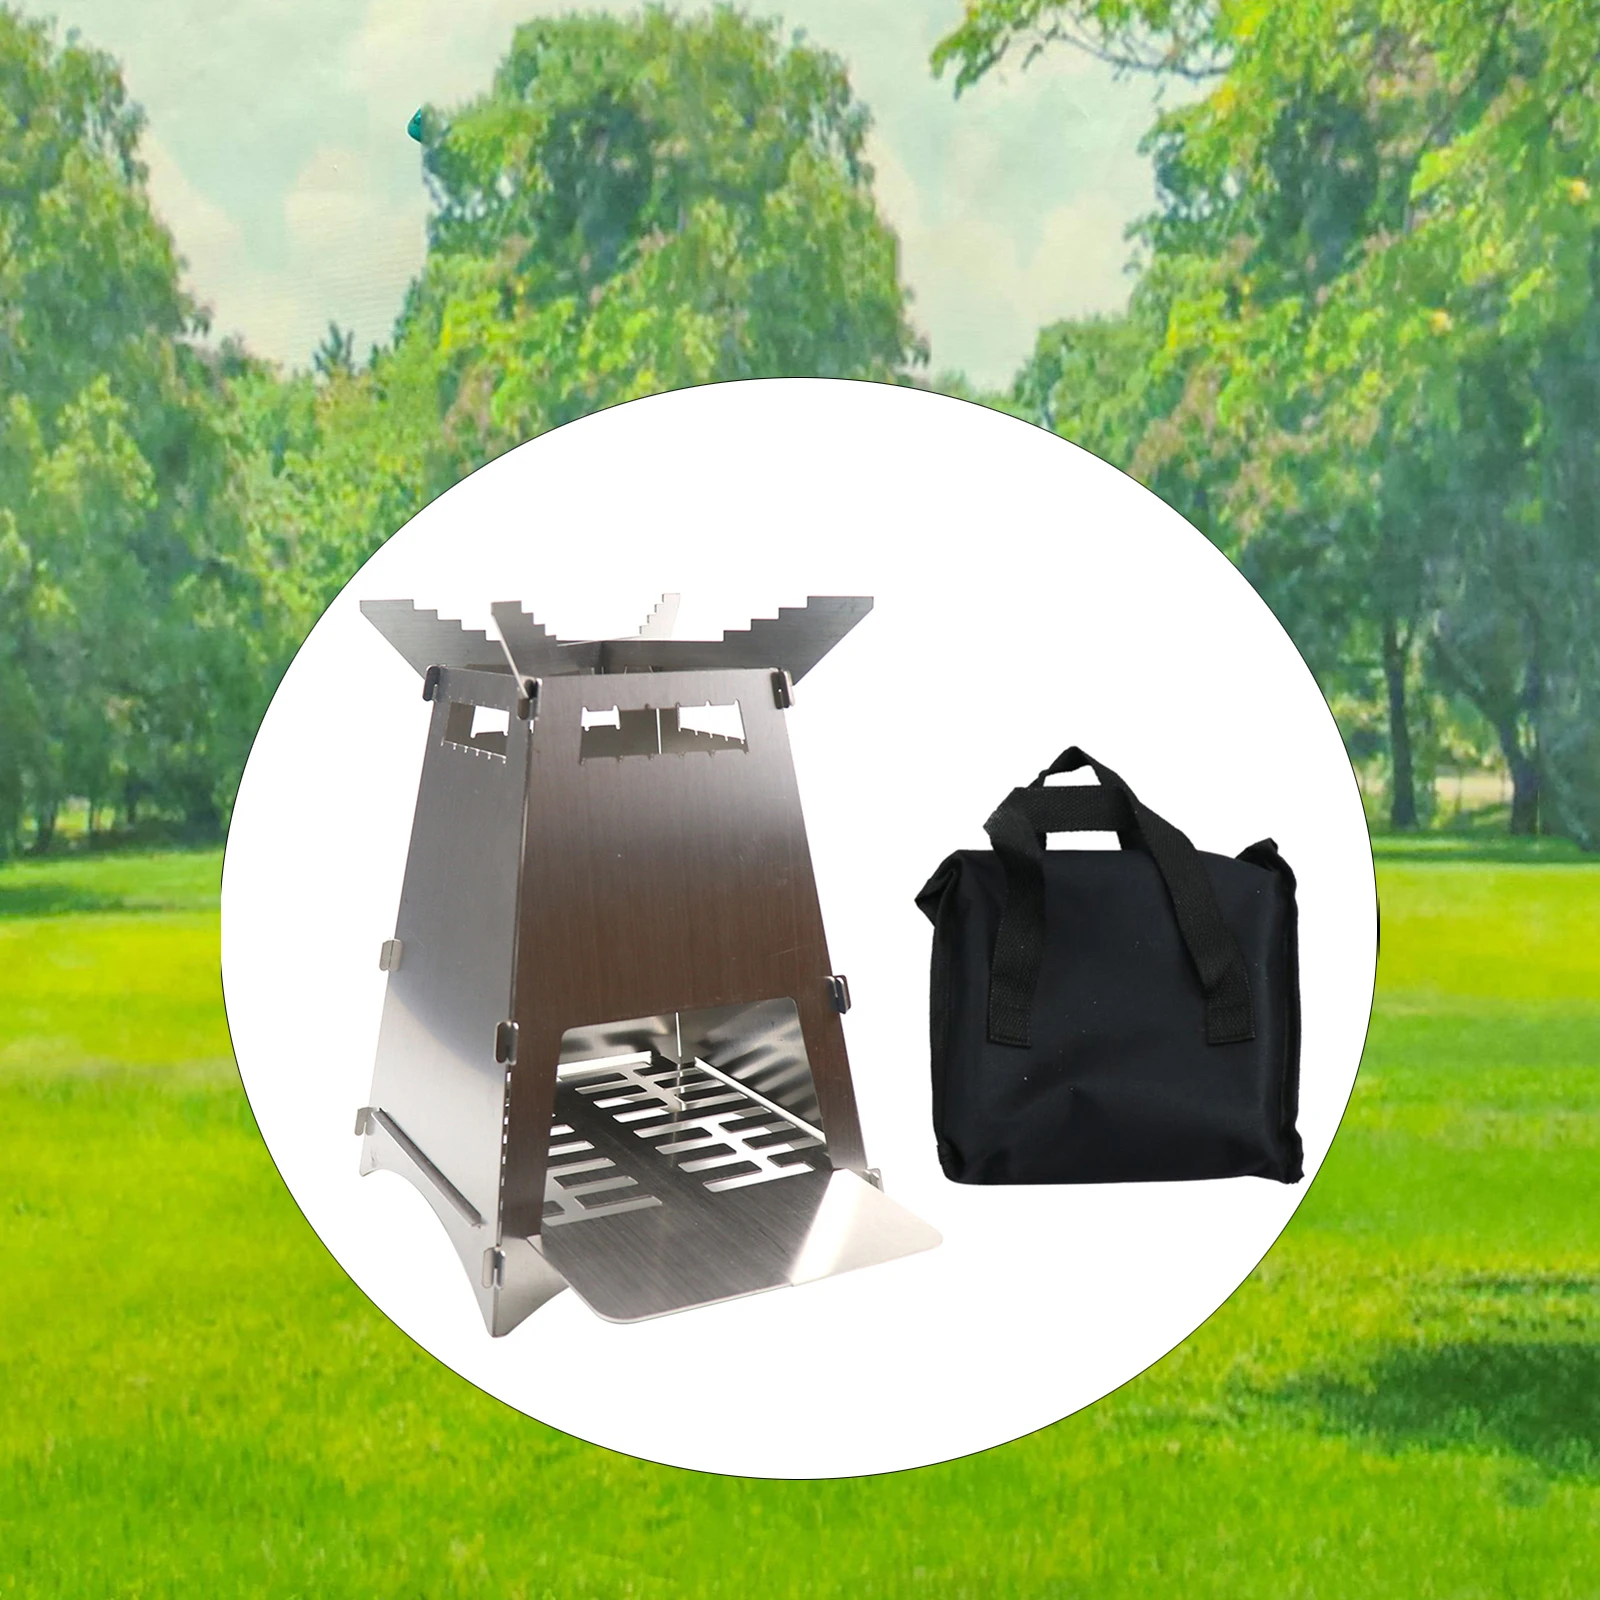 Collapsible Wood Stove Camping Picnic Backpacking Outdoor with Carry Bag